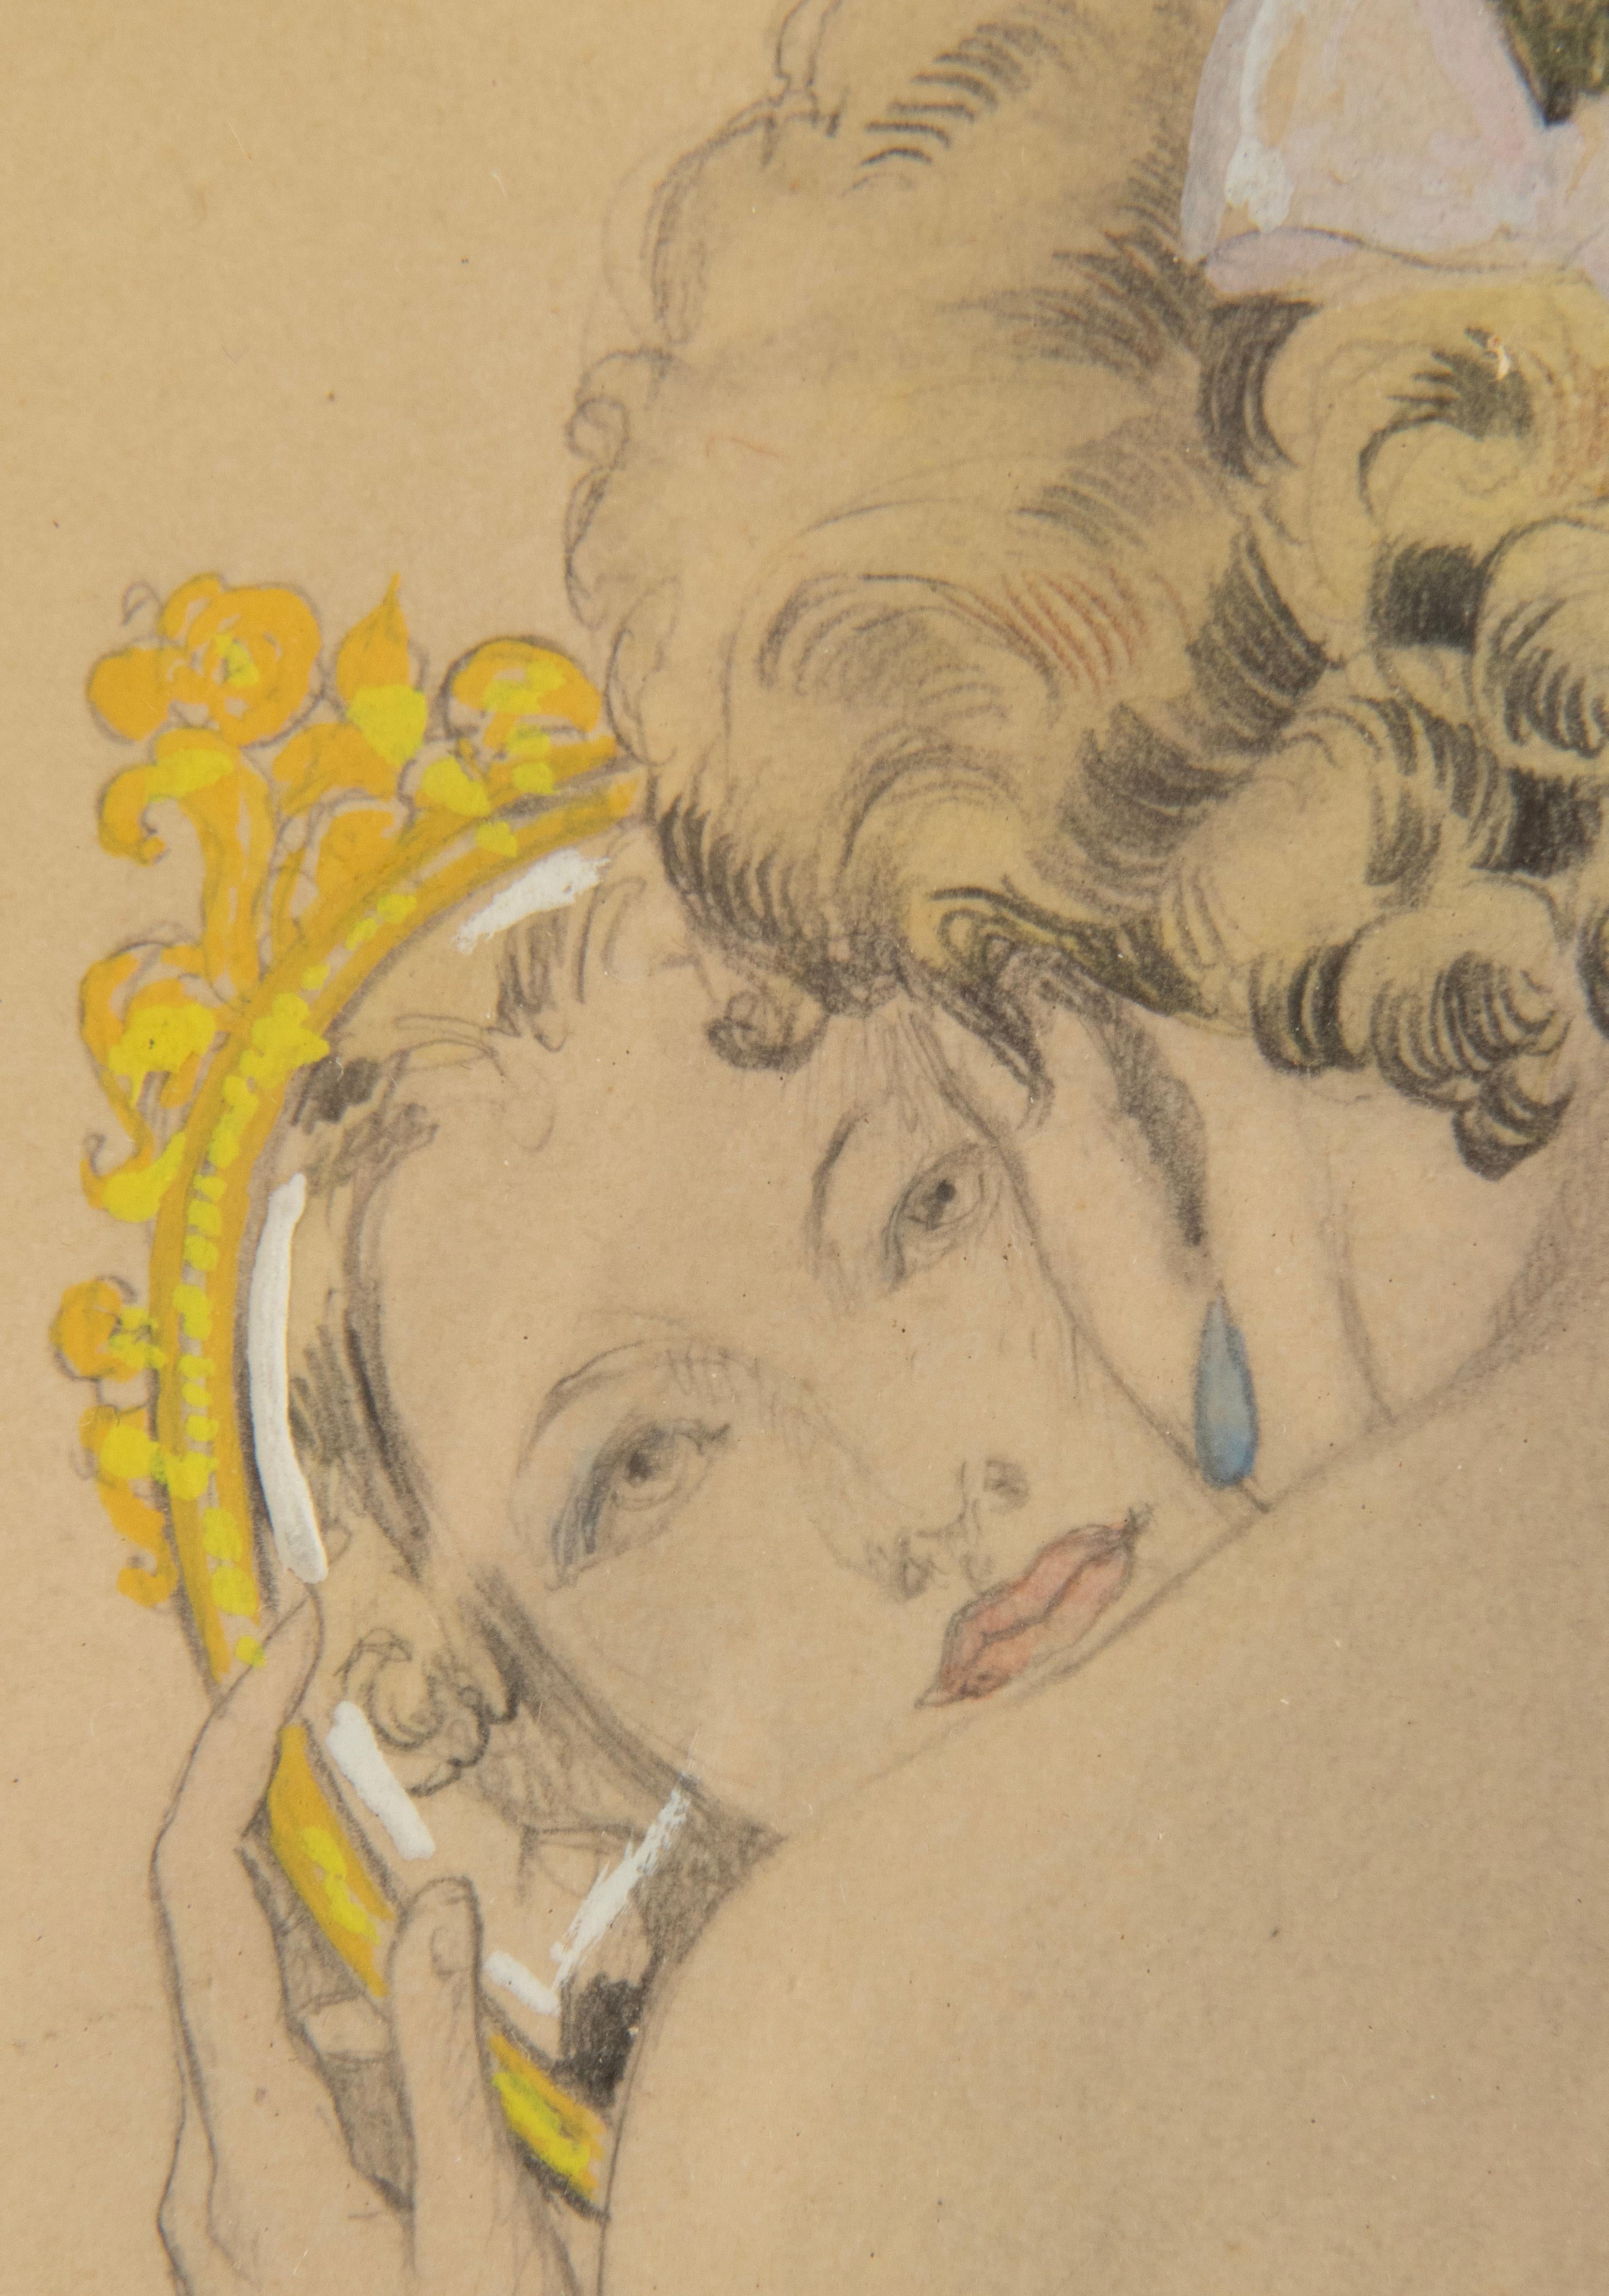 Pair of Art Deco Period Erotic Drawings / Watercolours by Umberto Brunelleschi For Sale 7